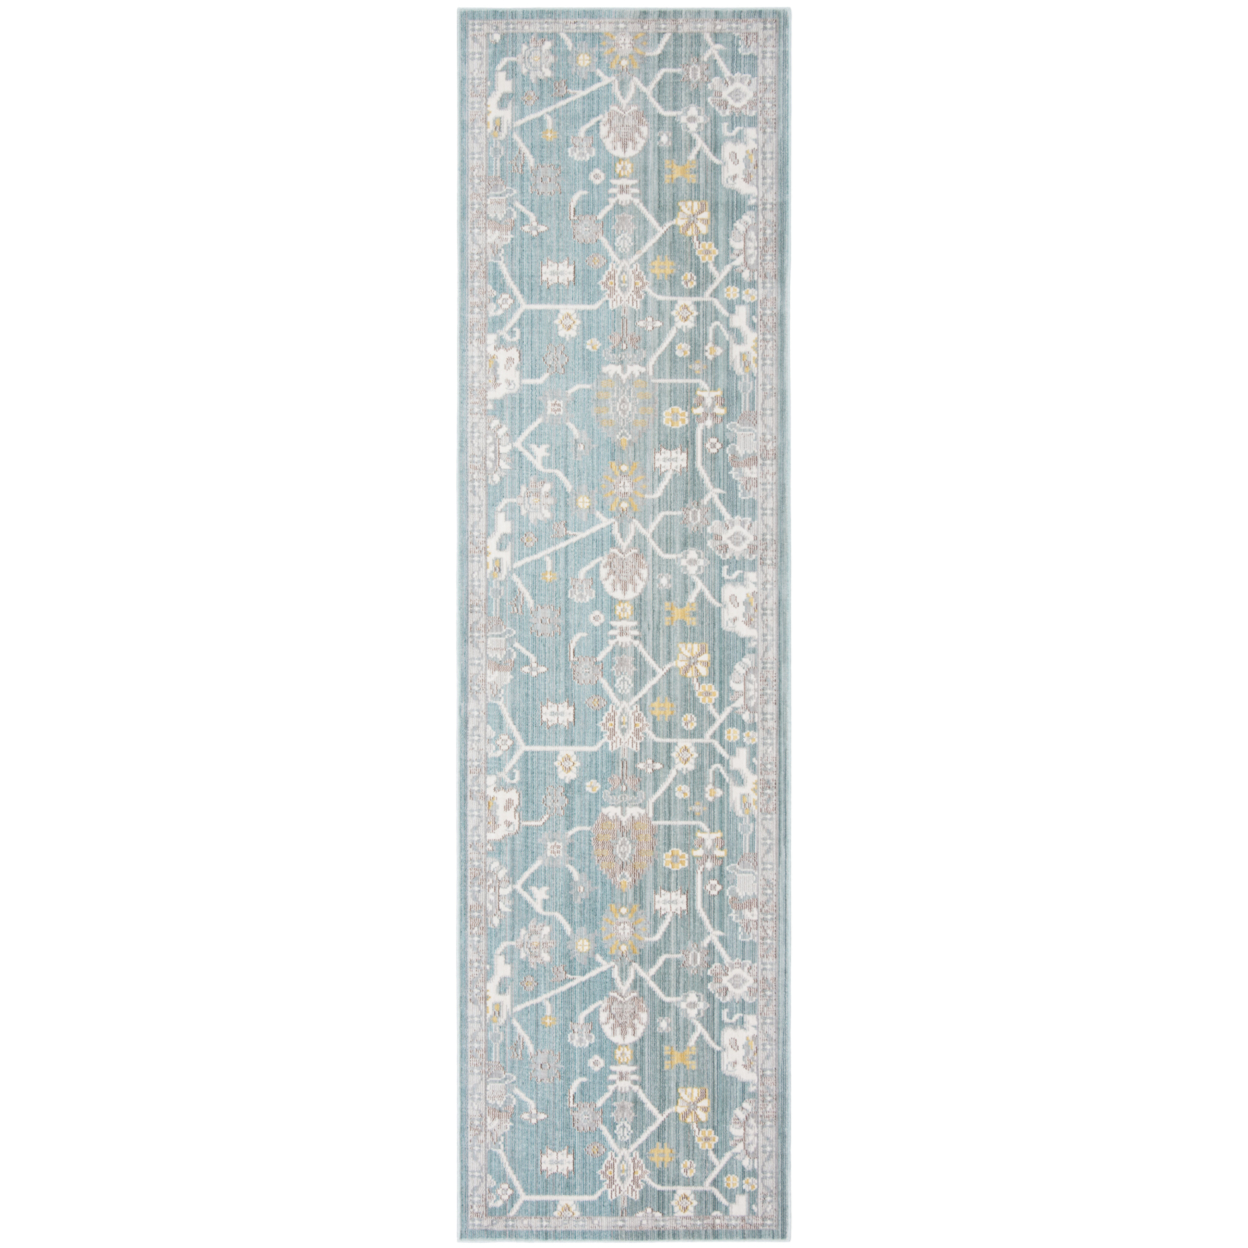 SAFAVIEH Valencia Collection VAL116S Steel Blue Rug - 2' 3 X 8'